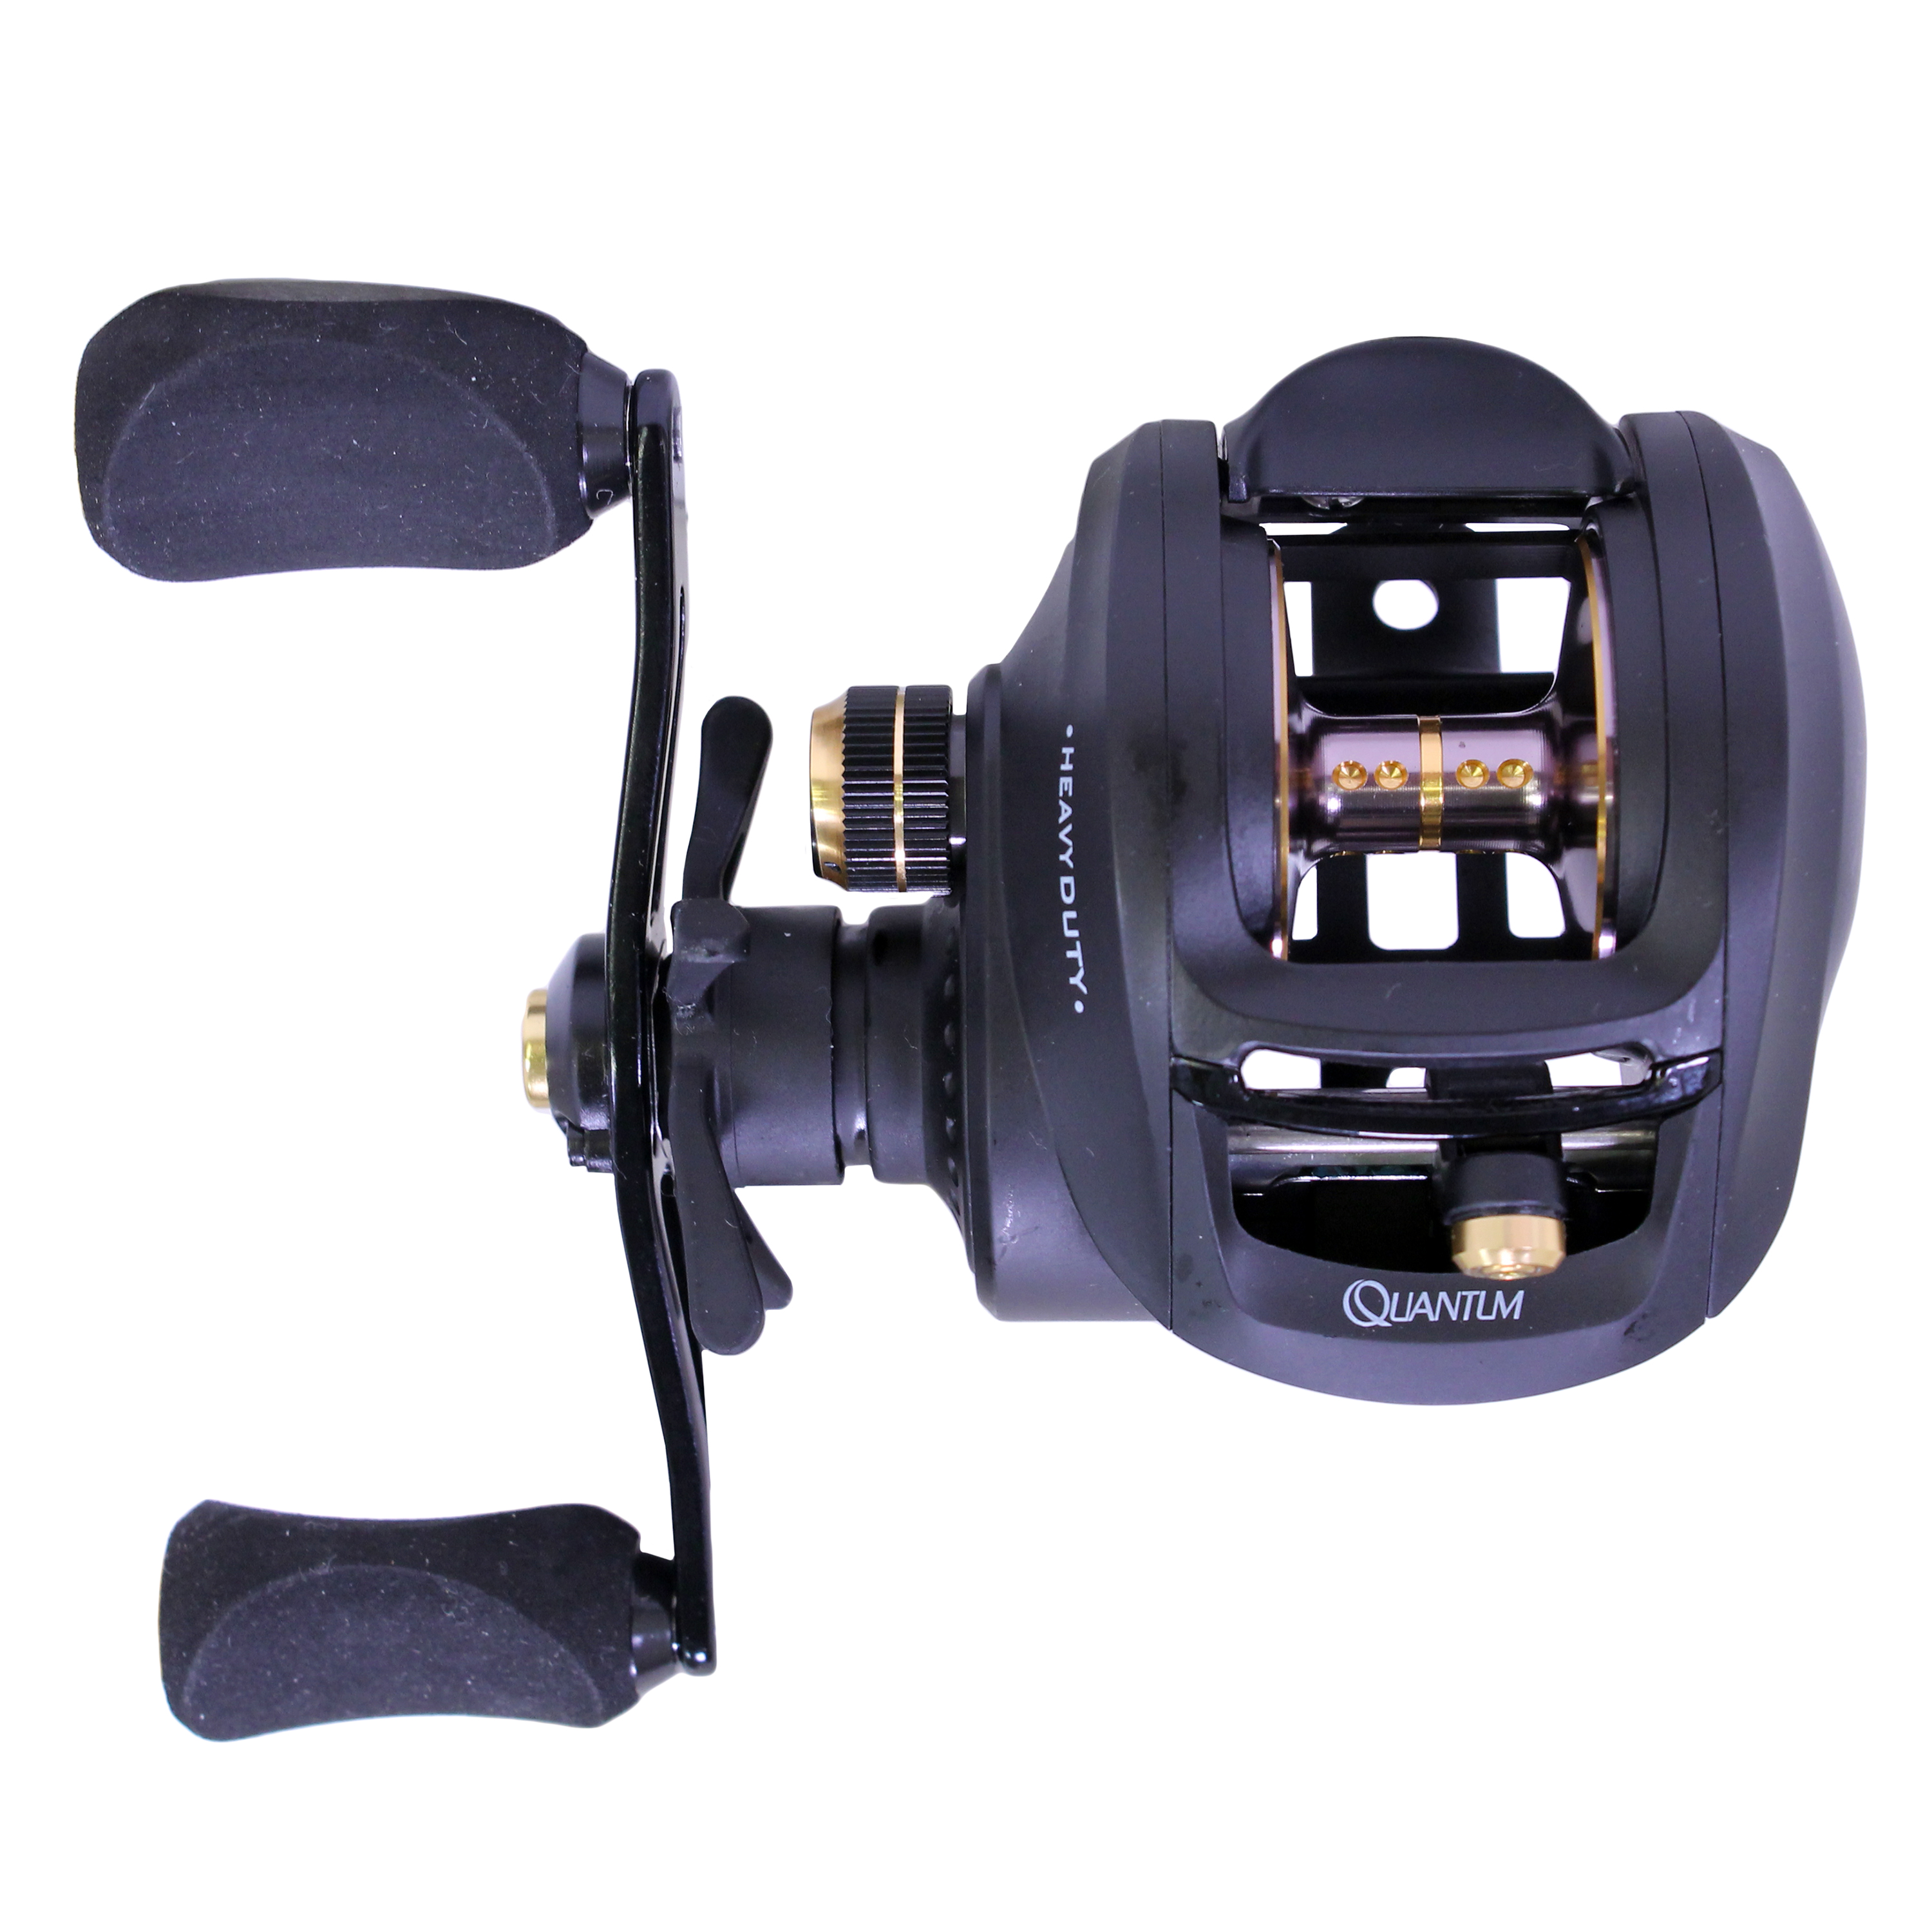 Quantum Smoke Heavy Duty Baitcast Reel  Up to $10.50 Off w/ Free Shipping  and Handling